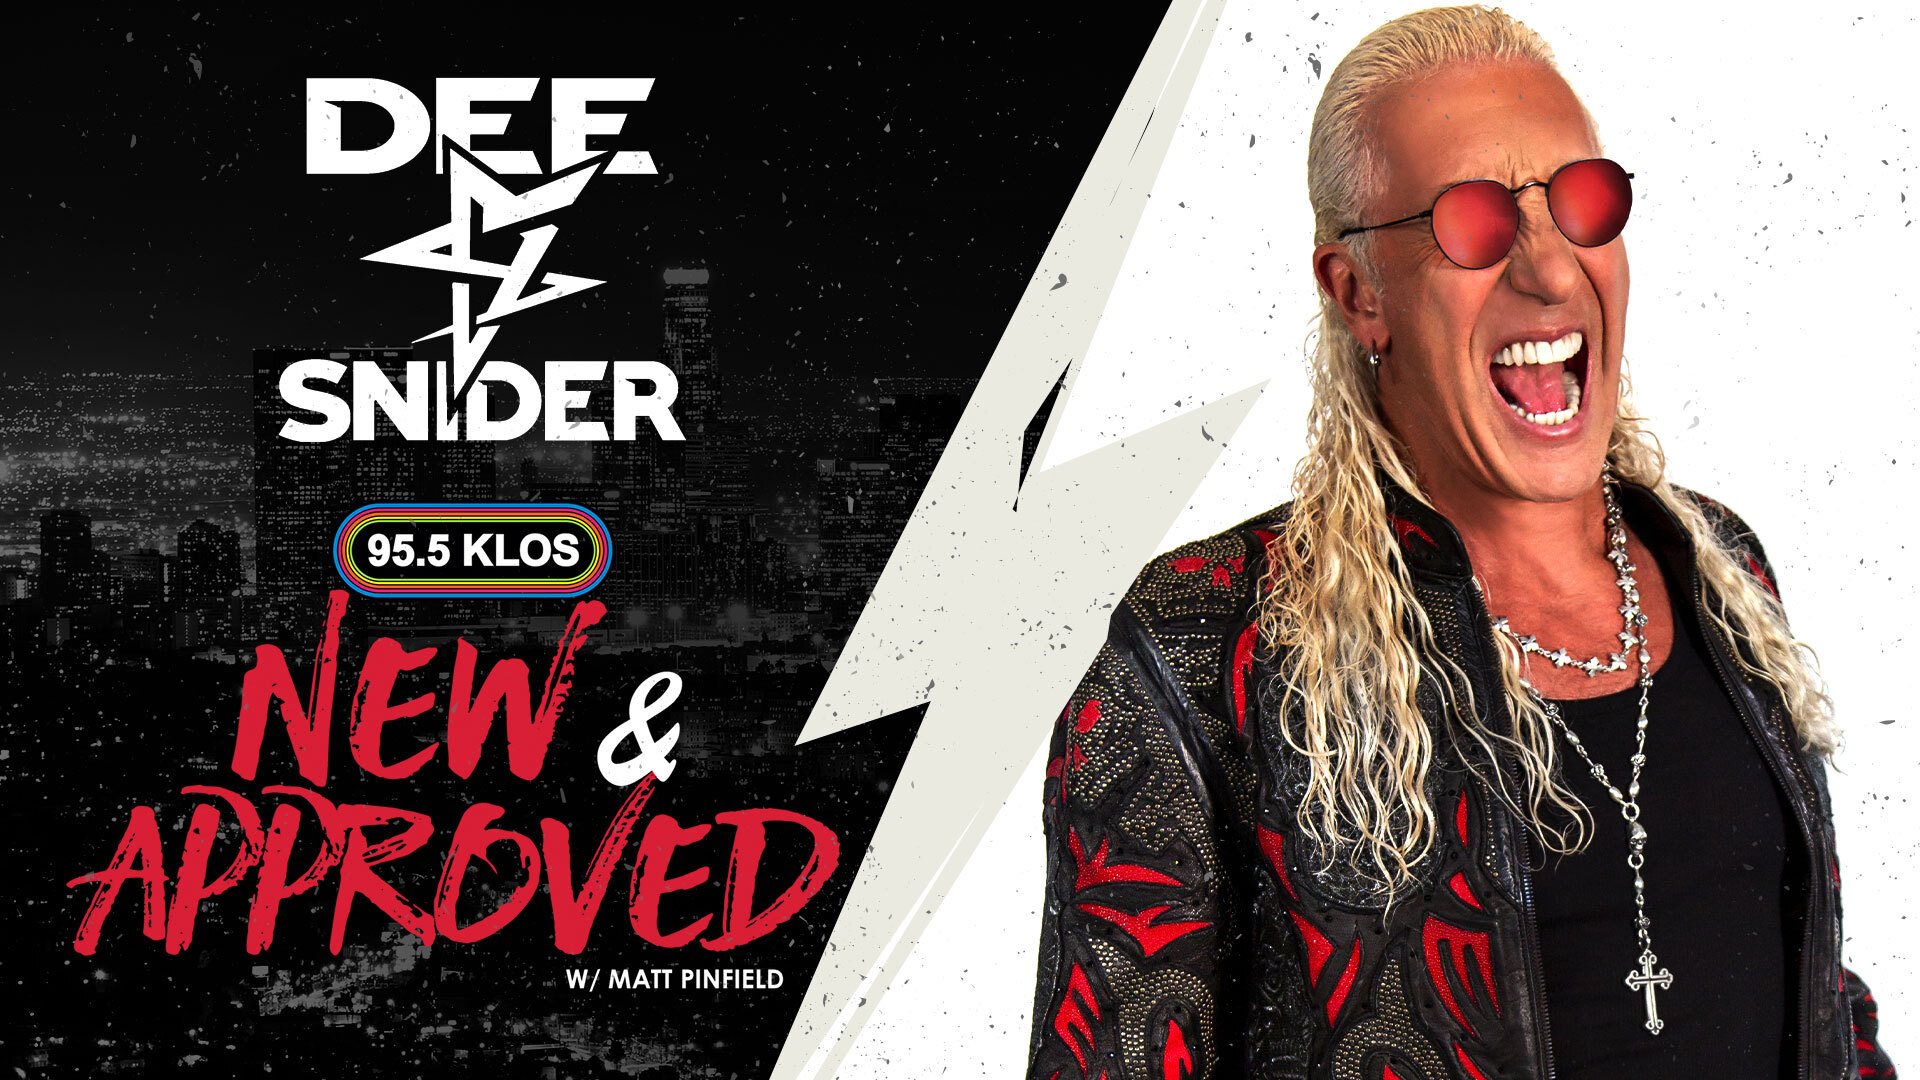 Dee Snider Speaks With Matt Pinfield About New Album “Leave A Scar” And Other Projects